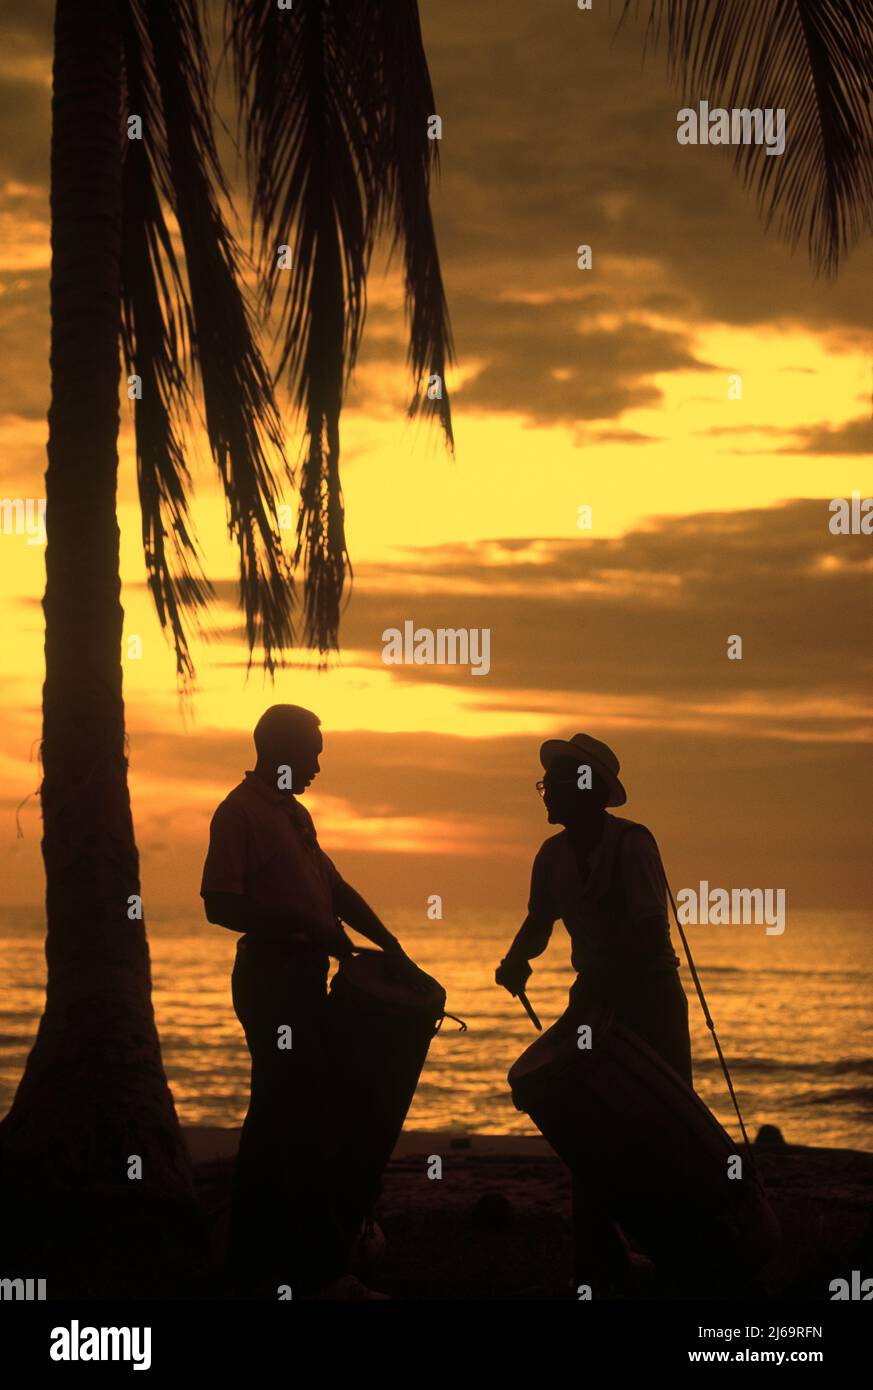 Two men in silhouette playing drums on the beach, Maracaibo Lake, Zulia State, Venezuela Stock Photo